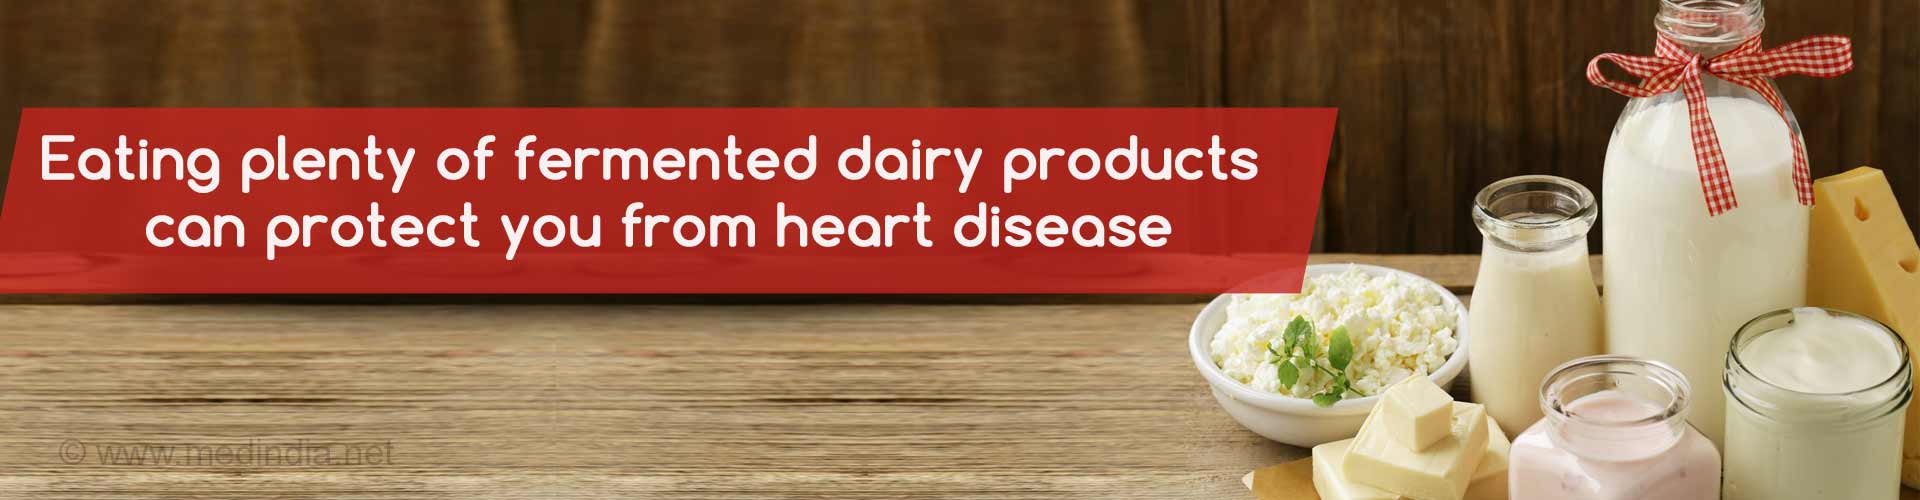 Eating plenty of fermented dairy products can protect you from heart disease.